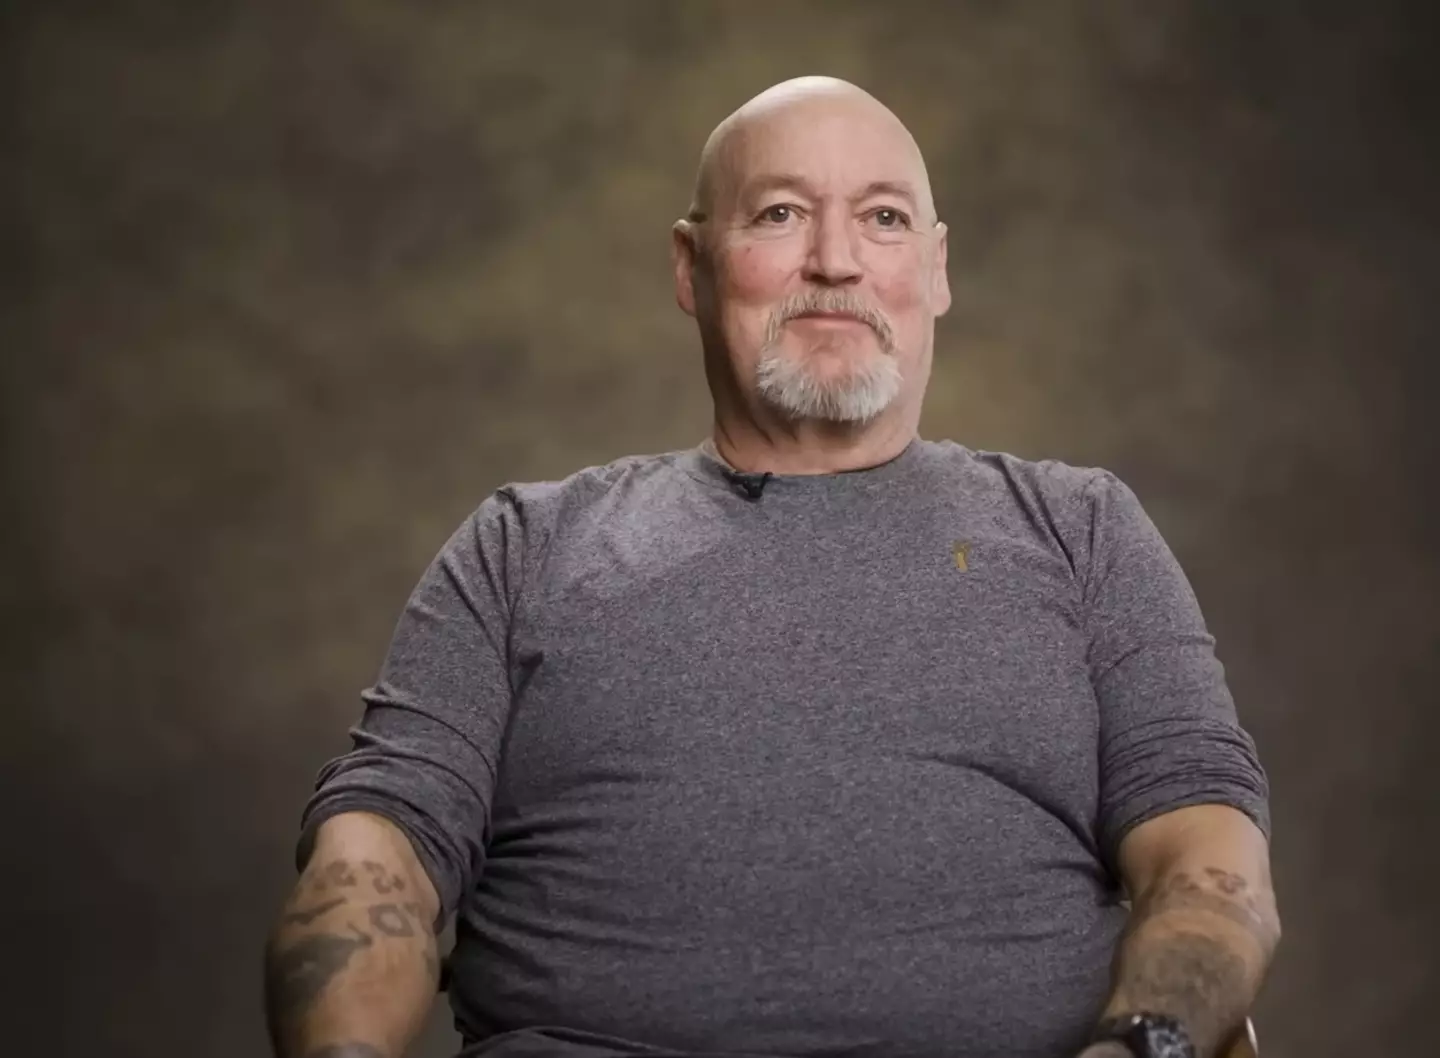 Jamie Morgan Kane spent 35 years in prison after he found a dead body in his home.